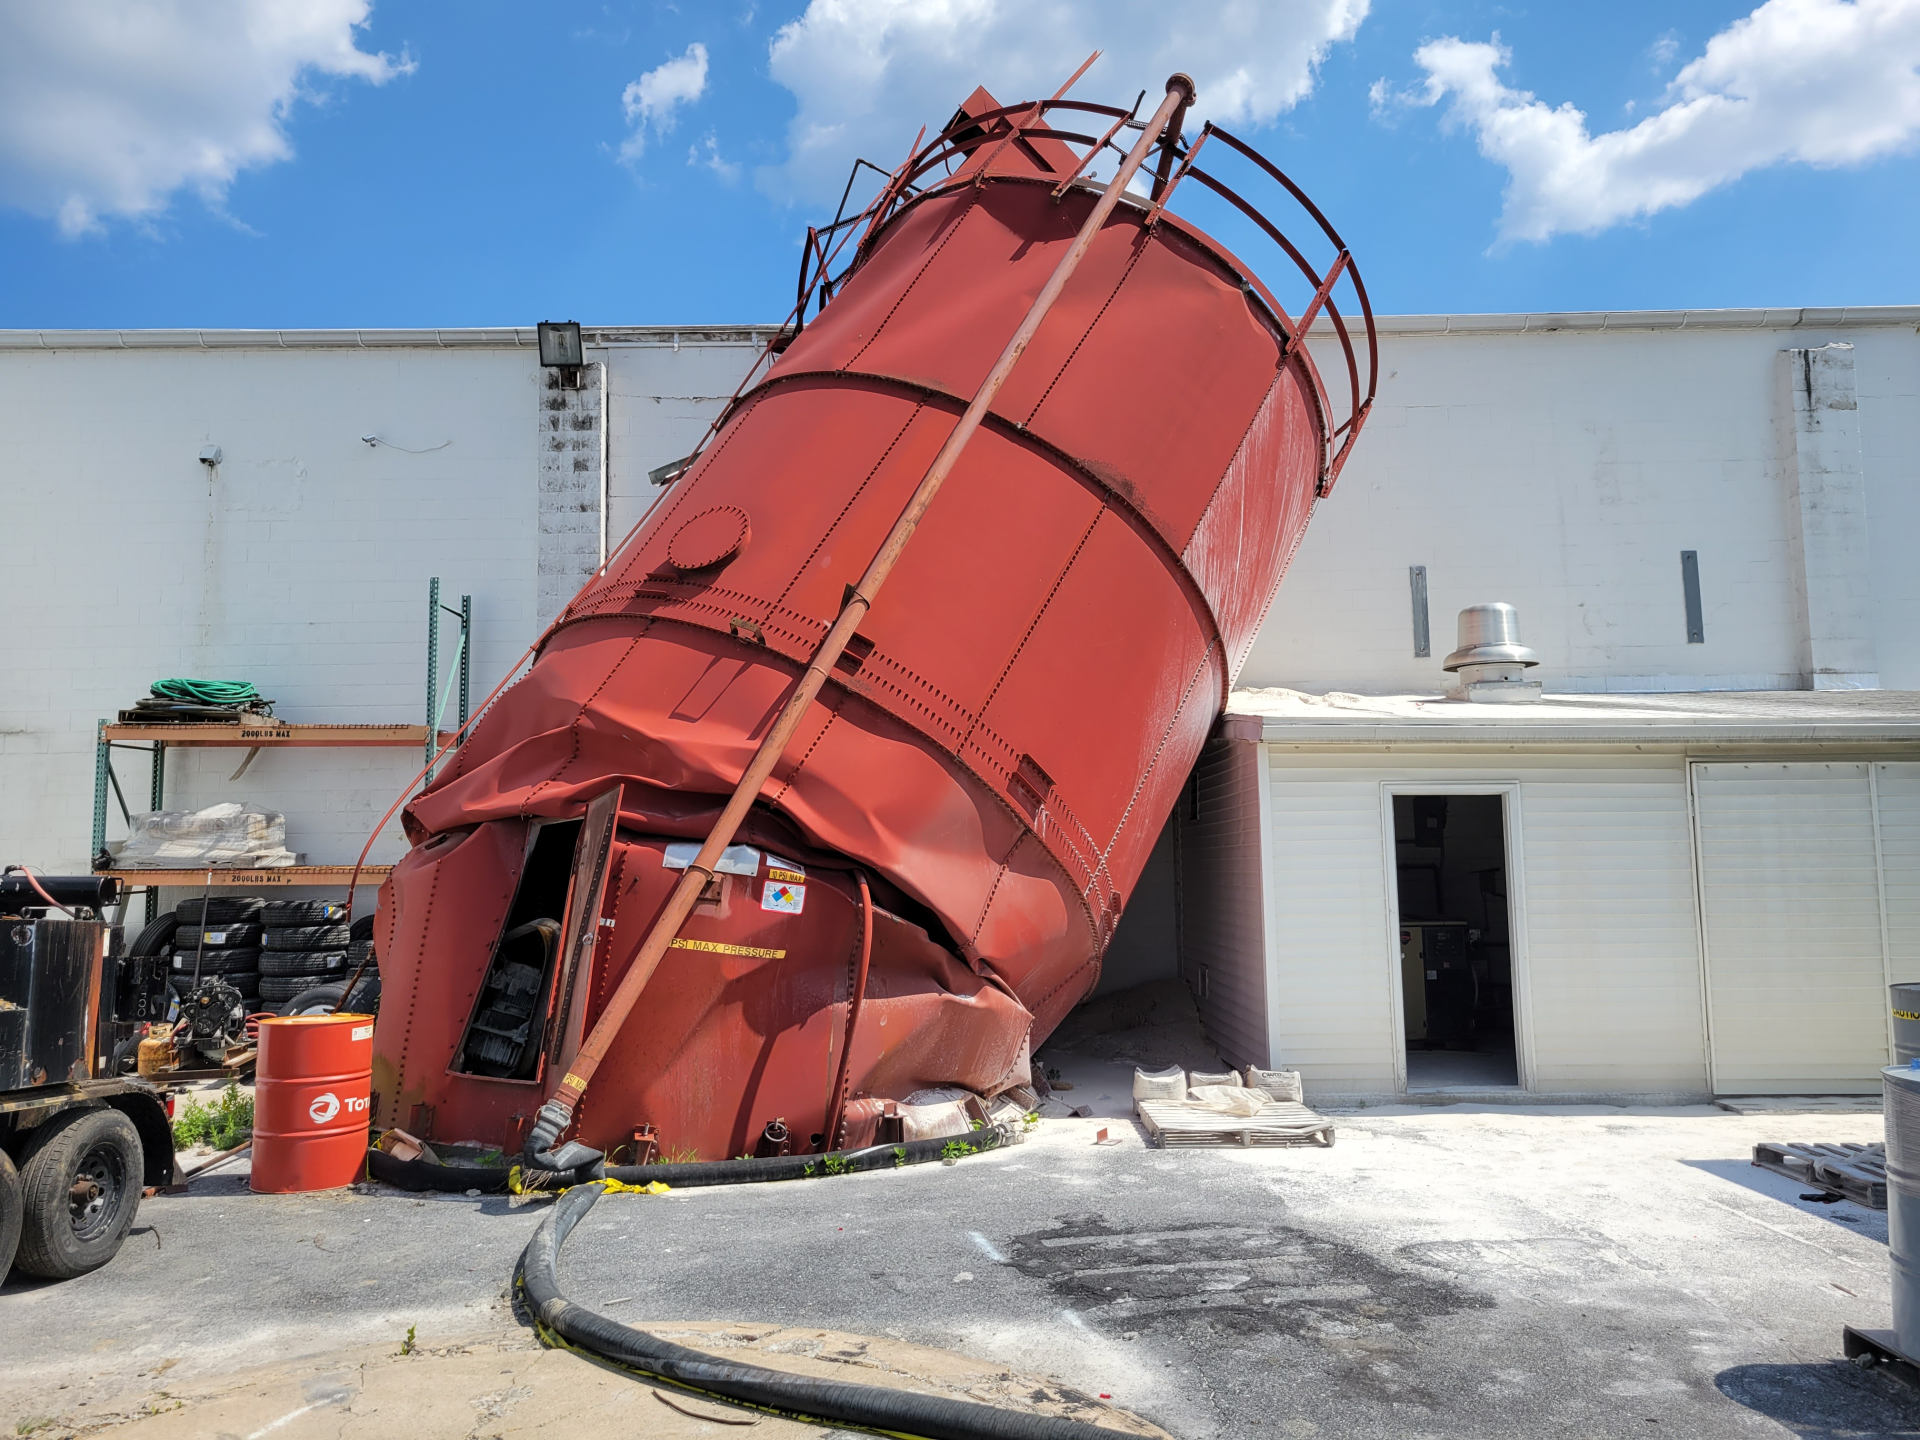 A partially collapsed silo before demolition